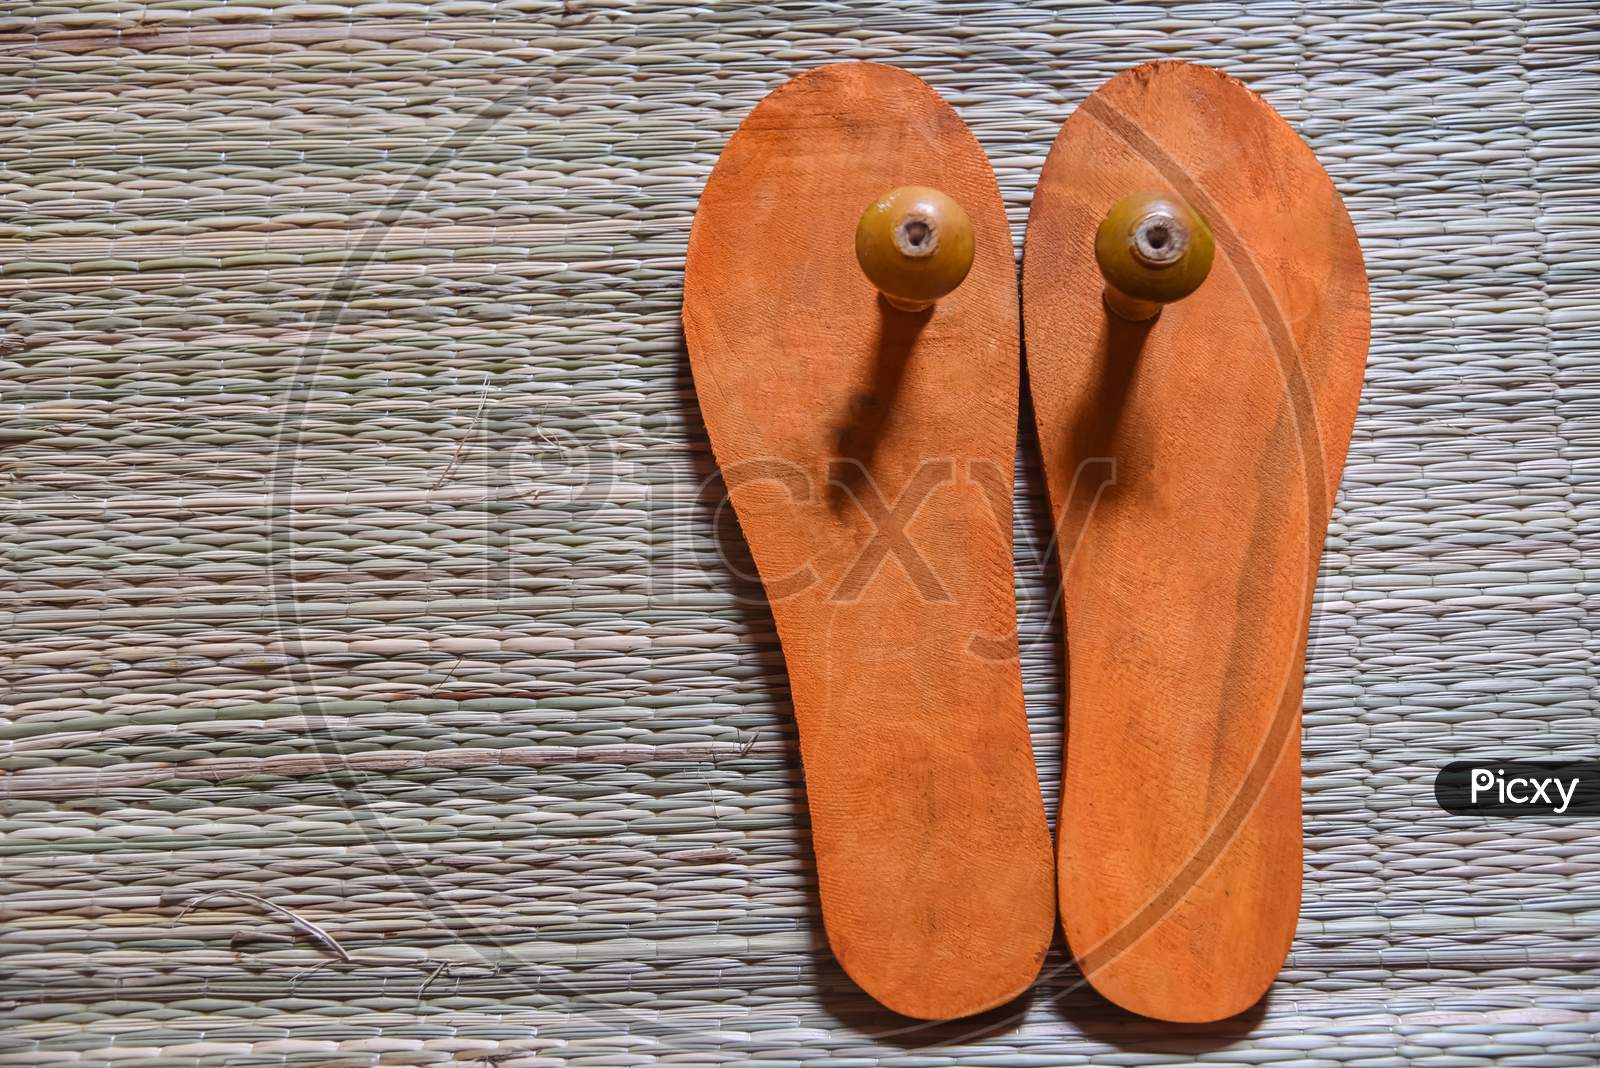 A closeup pair of wooden Indian traditional padukas or footwear for Hindu priests and Brahmins.